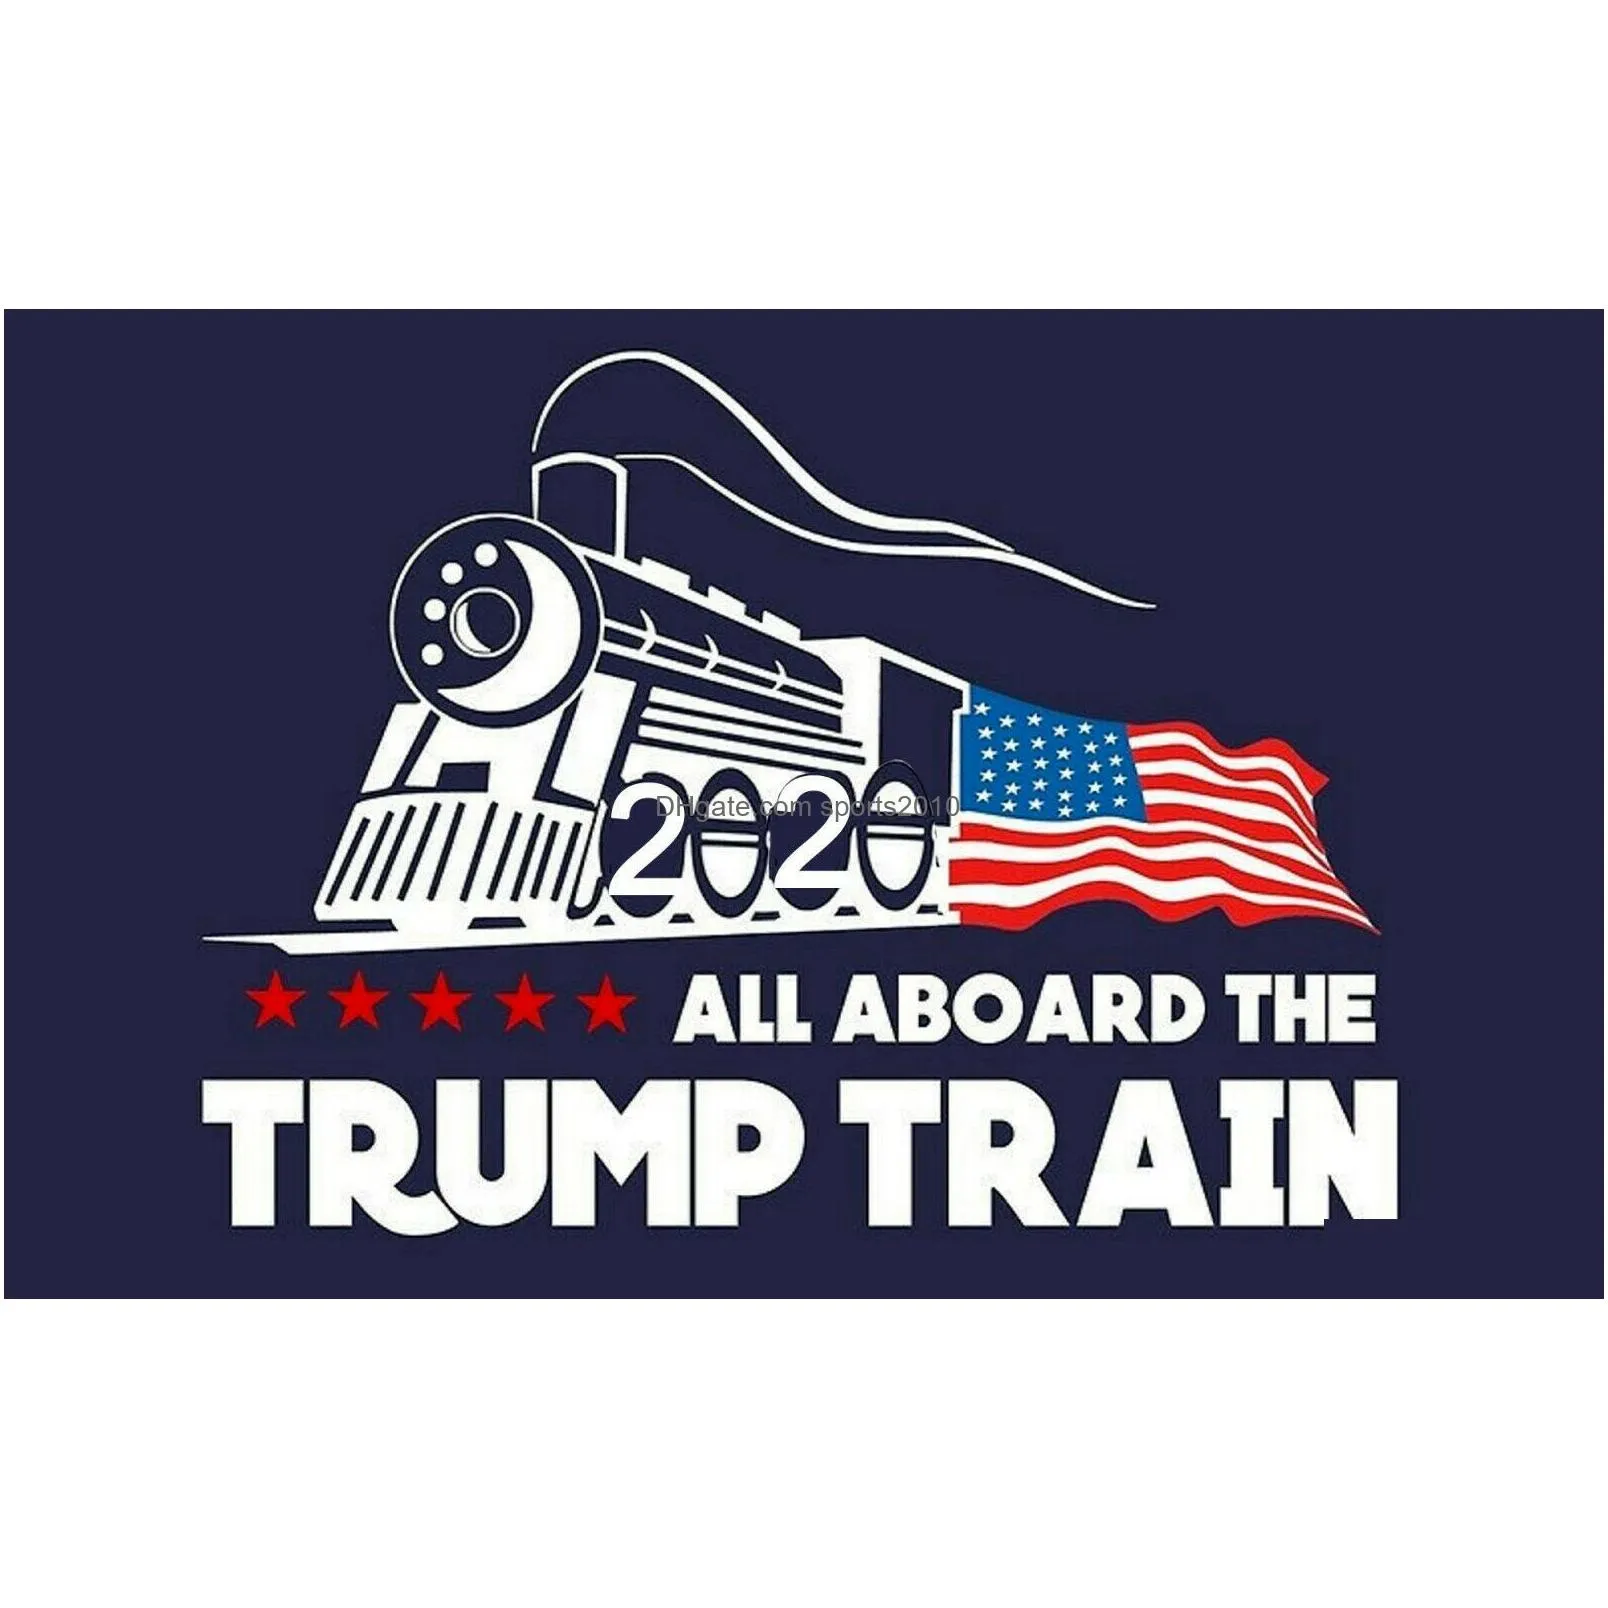 Car Stickers New Trump Train Bernie Locomotive Keep And Bear Arms Window Home Living Room Decor Wall Drop Delivery Automobiles Motorcy Dh5Ek